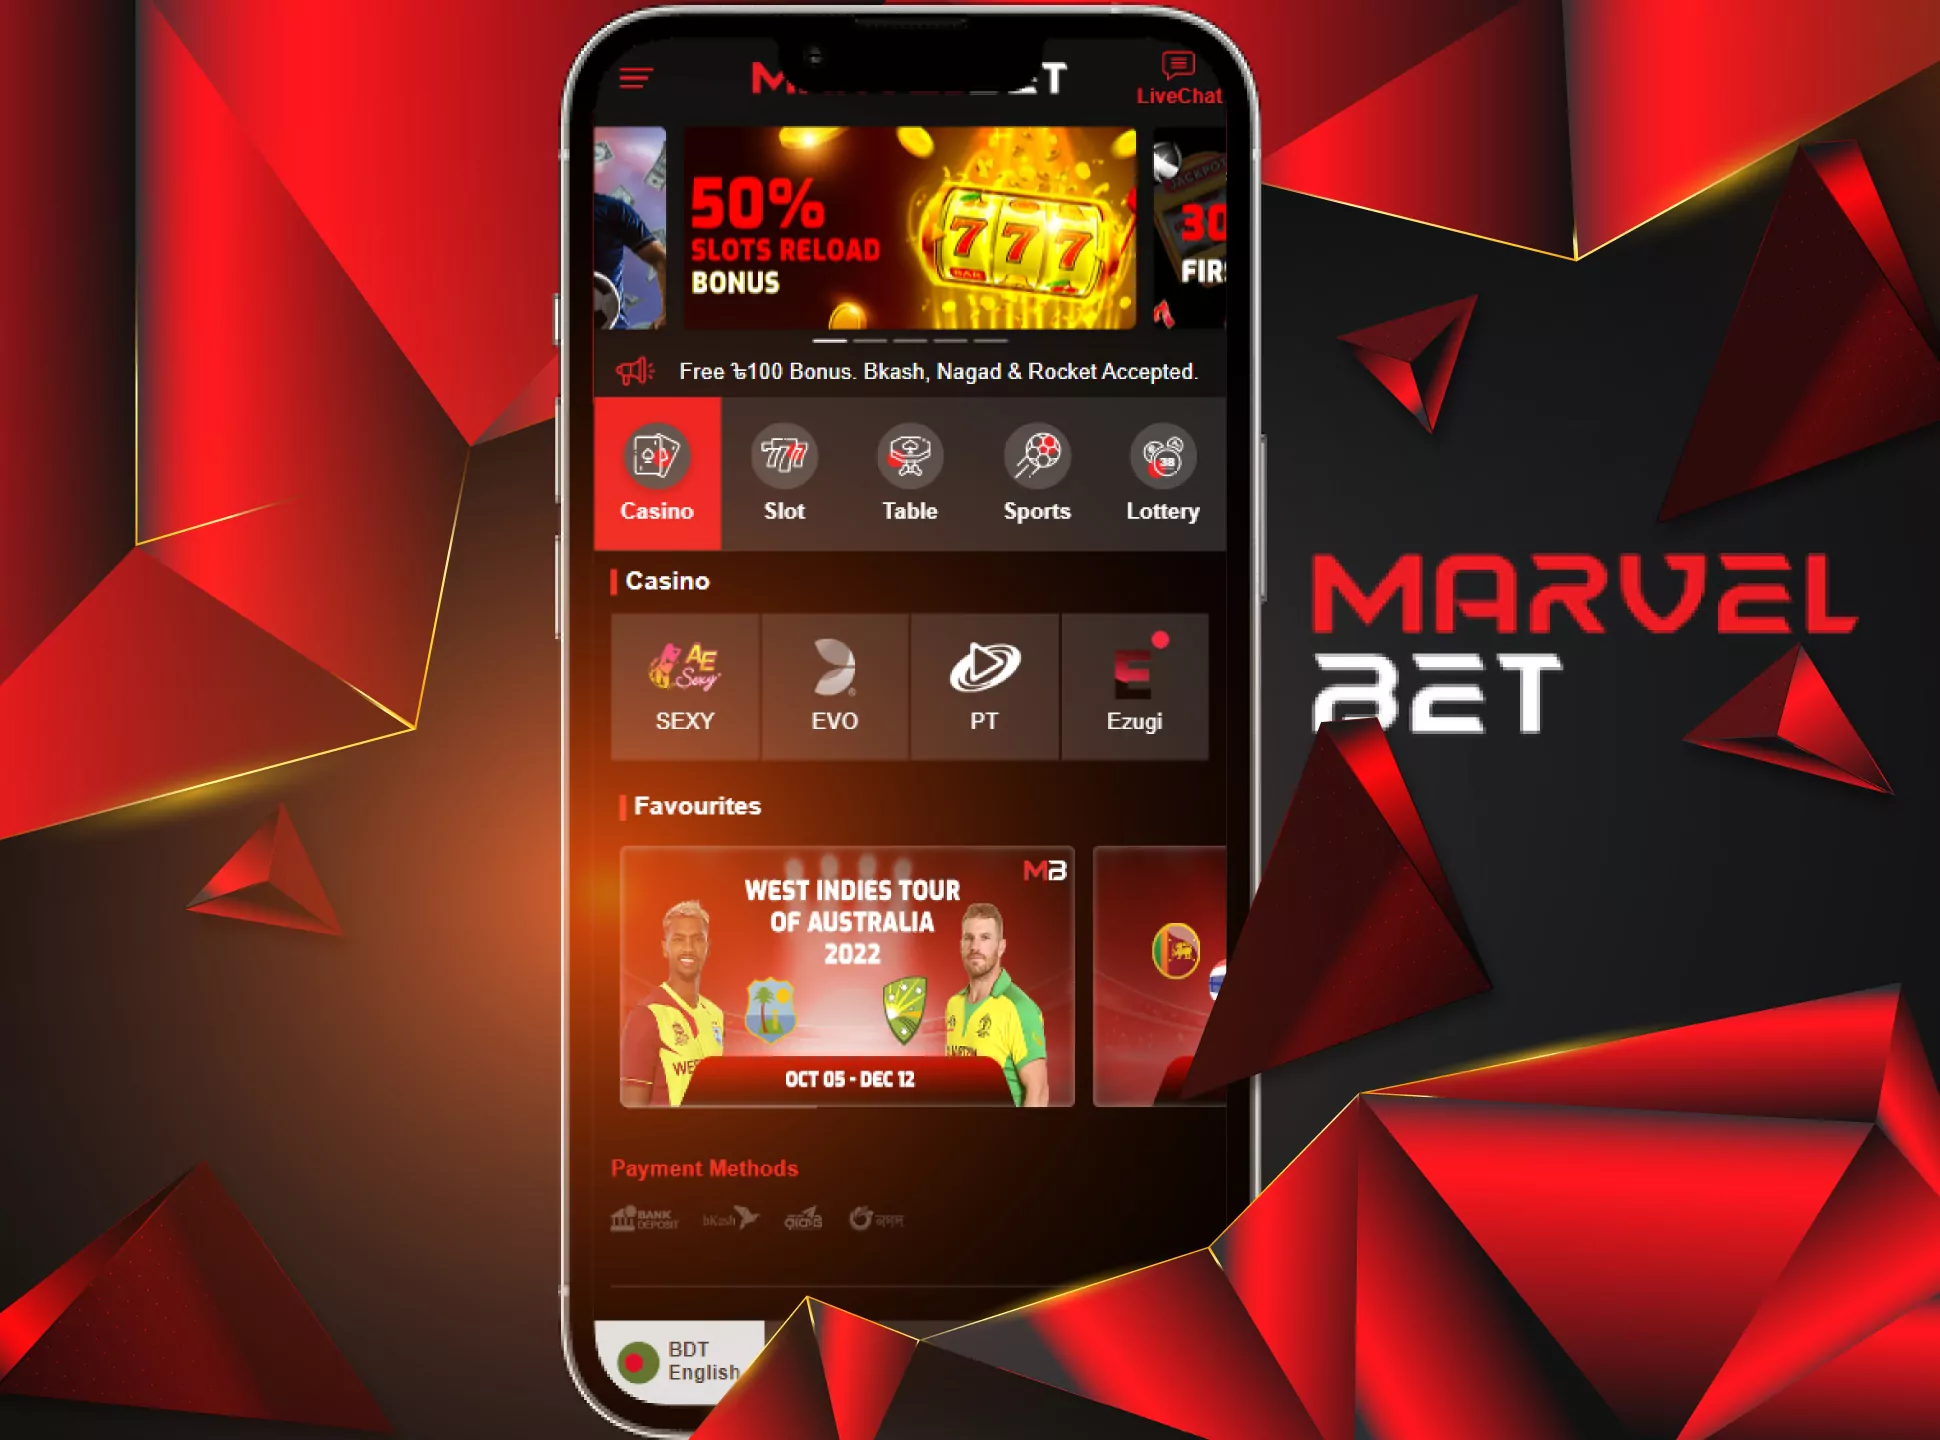 MarvelBet also has an online casino in its app.